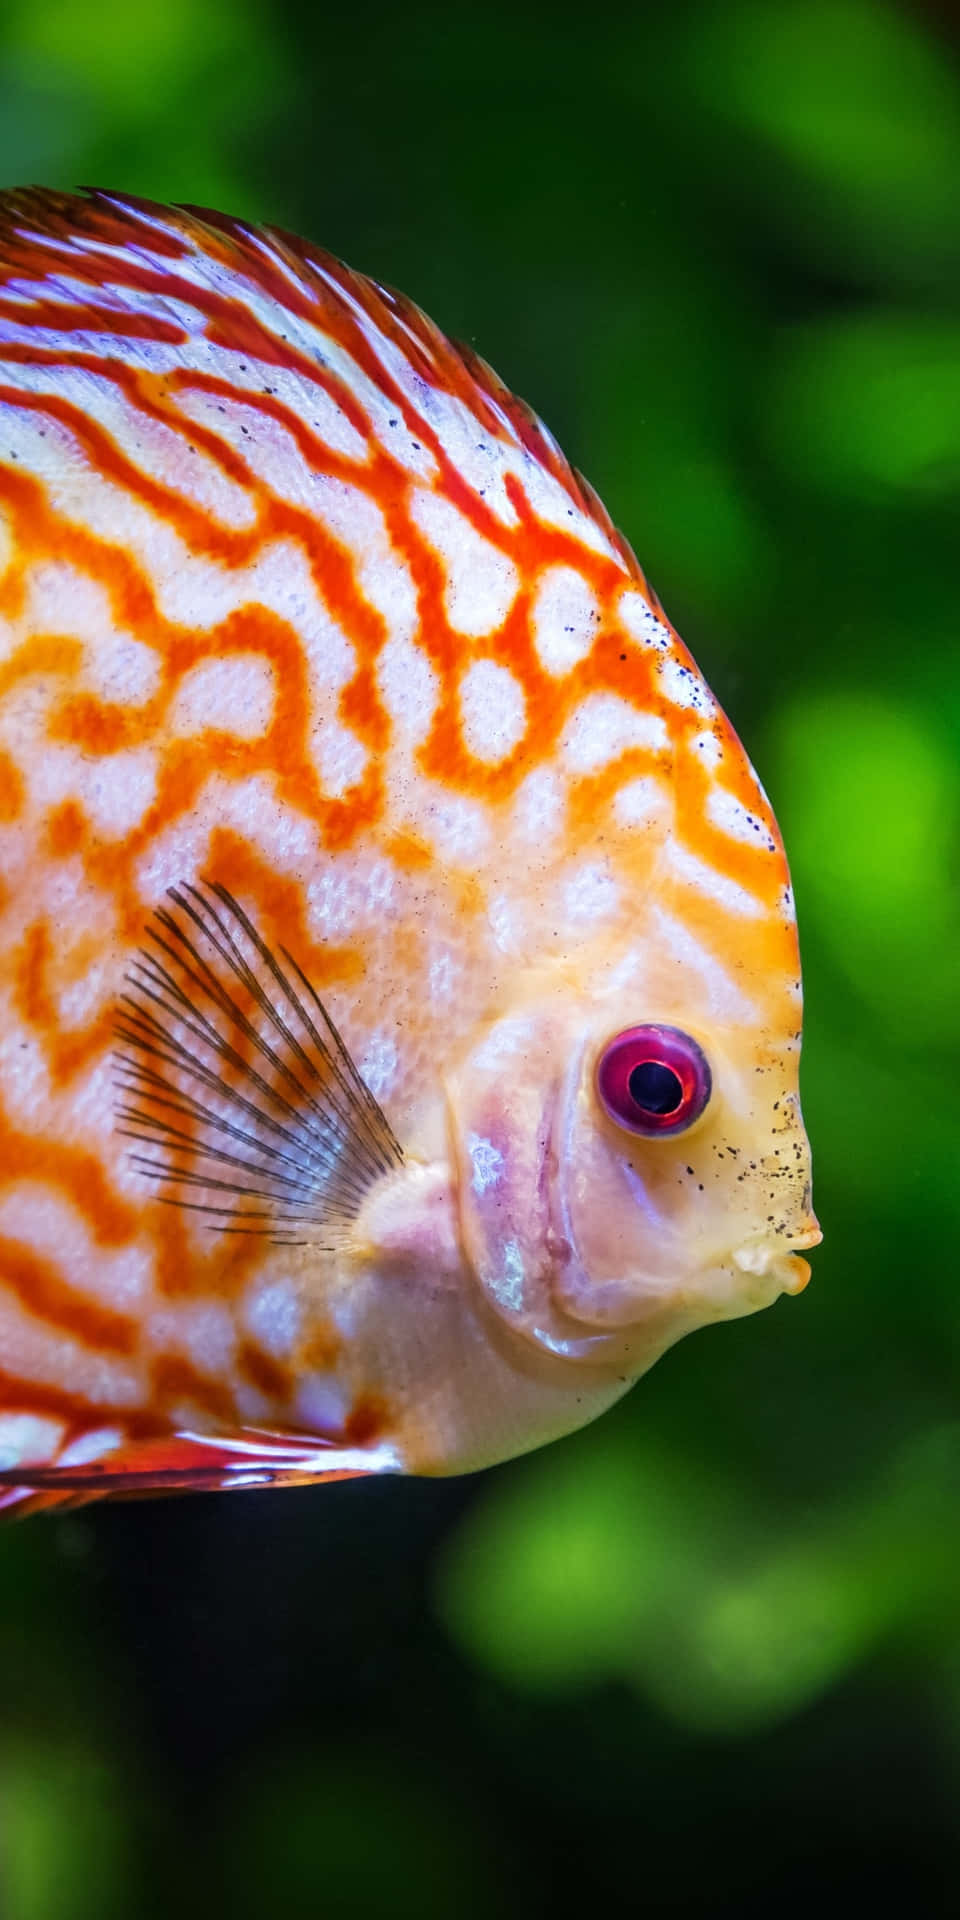 A vibrant pixelized fish against a beautiful background